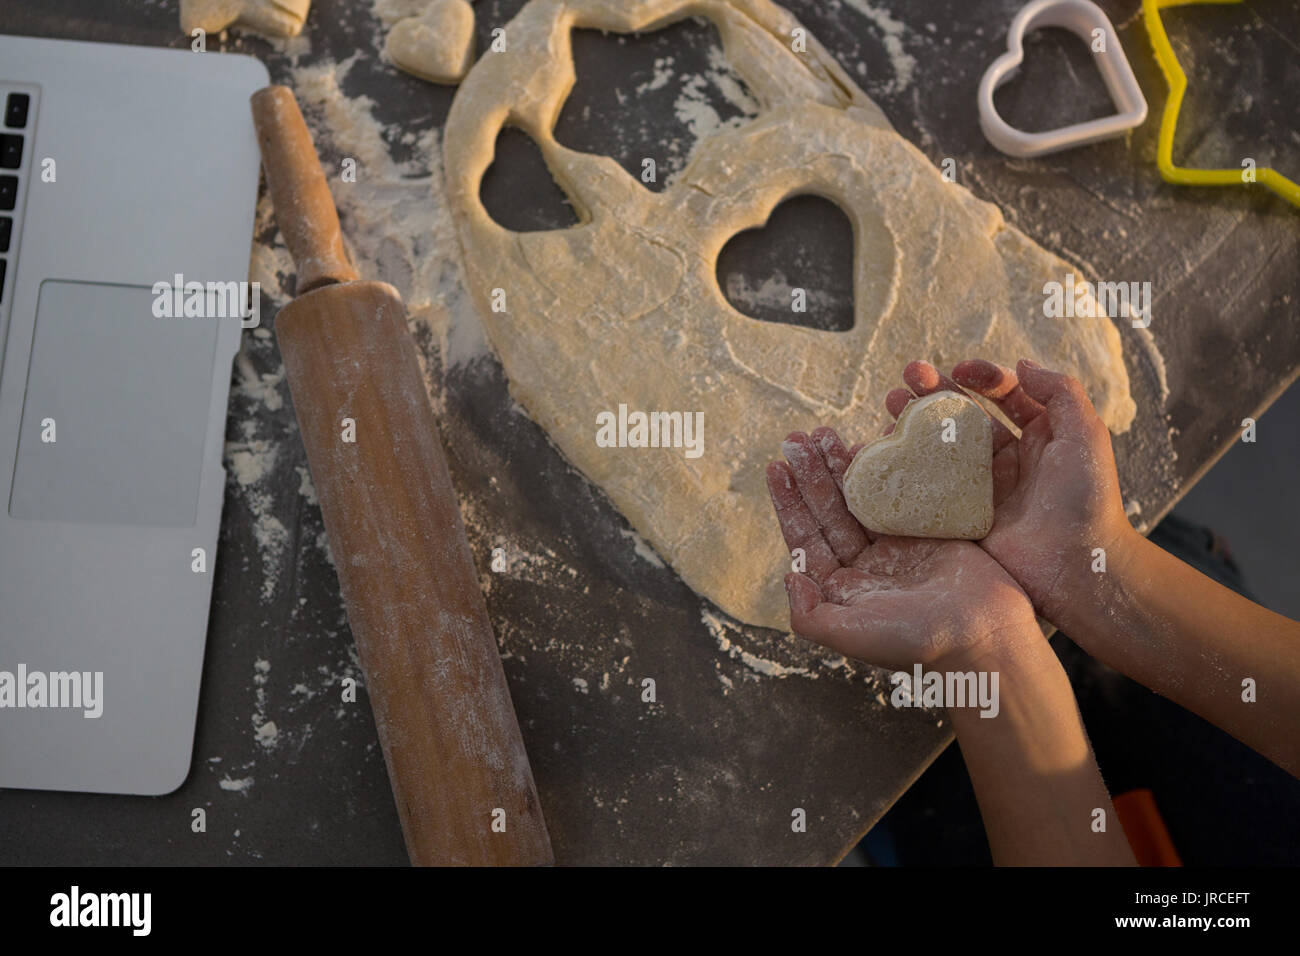 Cropped hands of girl holding heart shape dough at kitchen counter Stock Photo